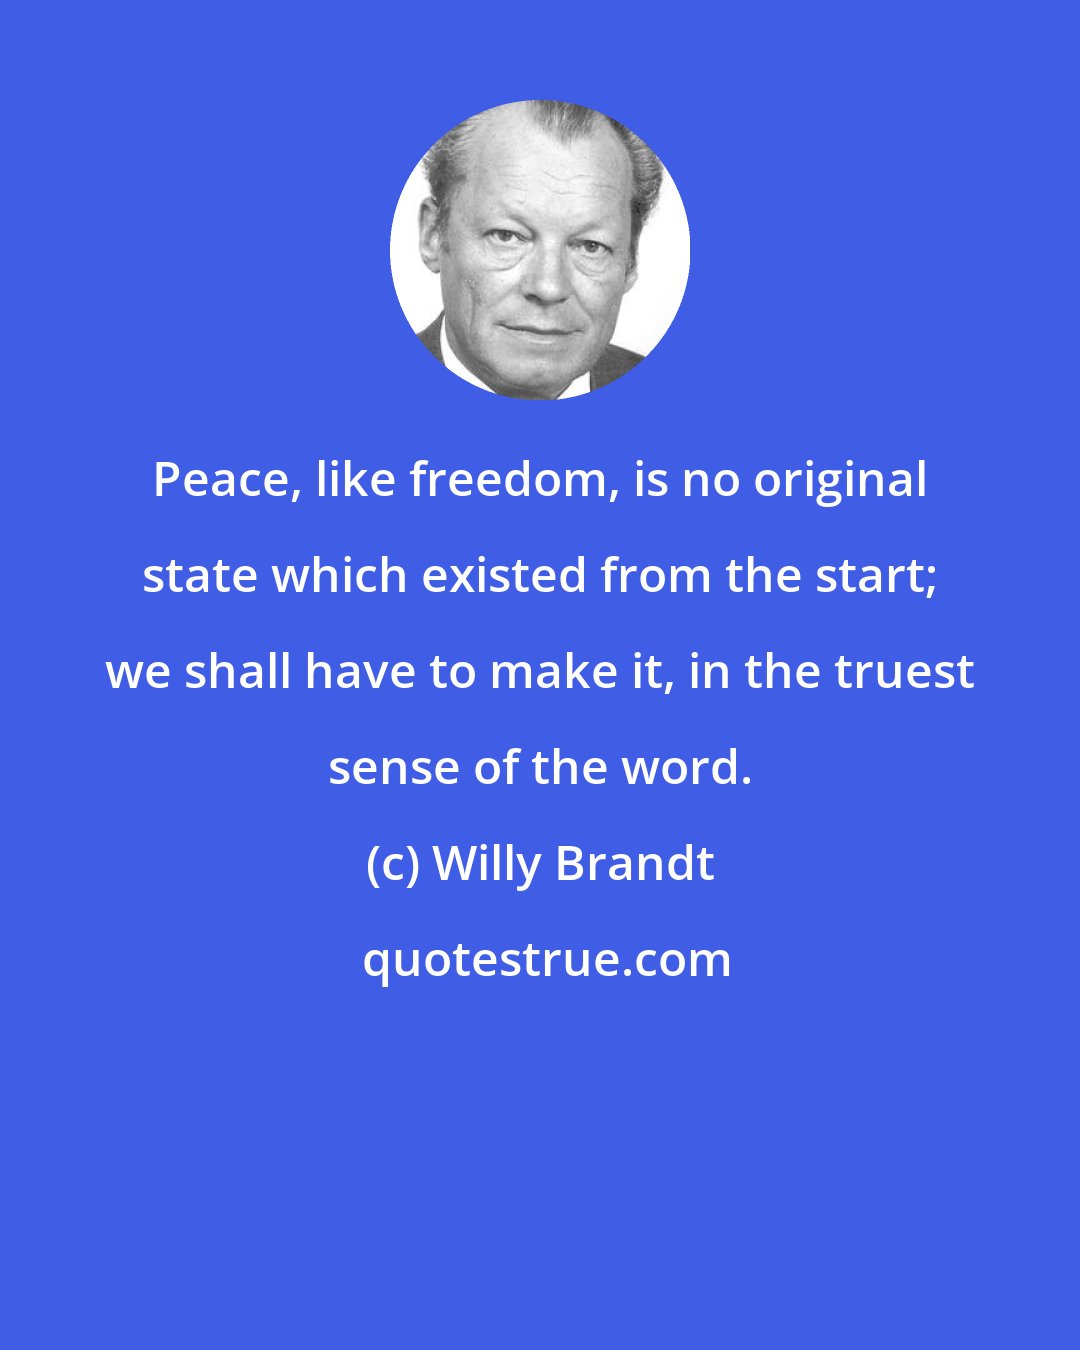 Willy Brandt: Peace, like freedom, is no original state which existed from the start; we shall have to make it, in the truest sense of the word.